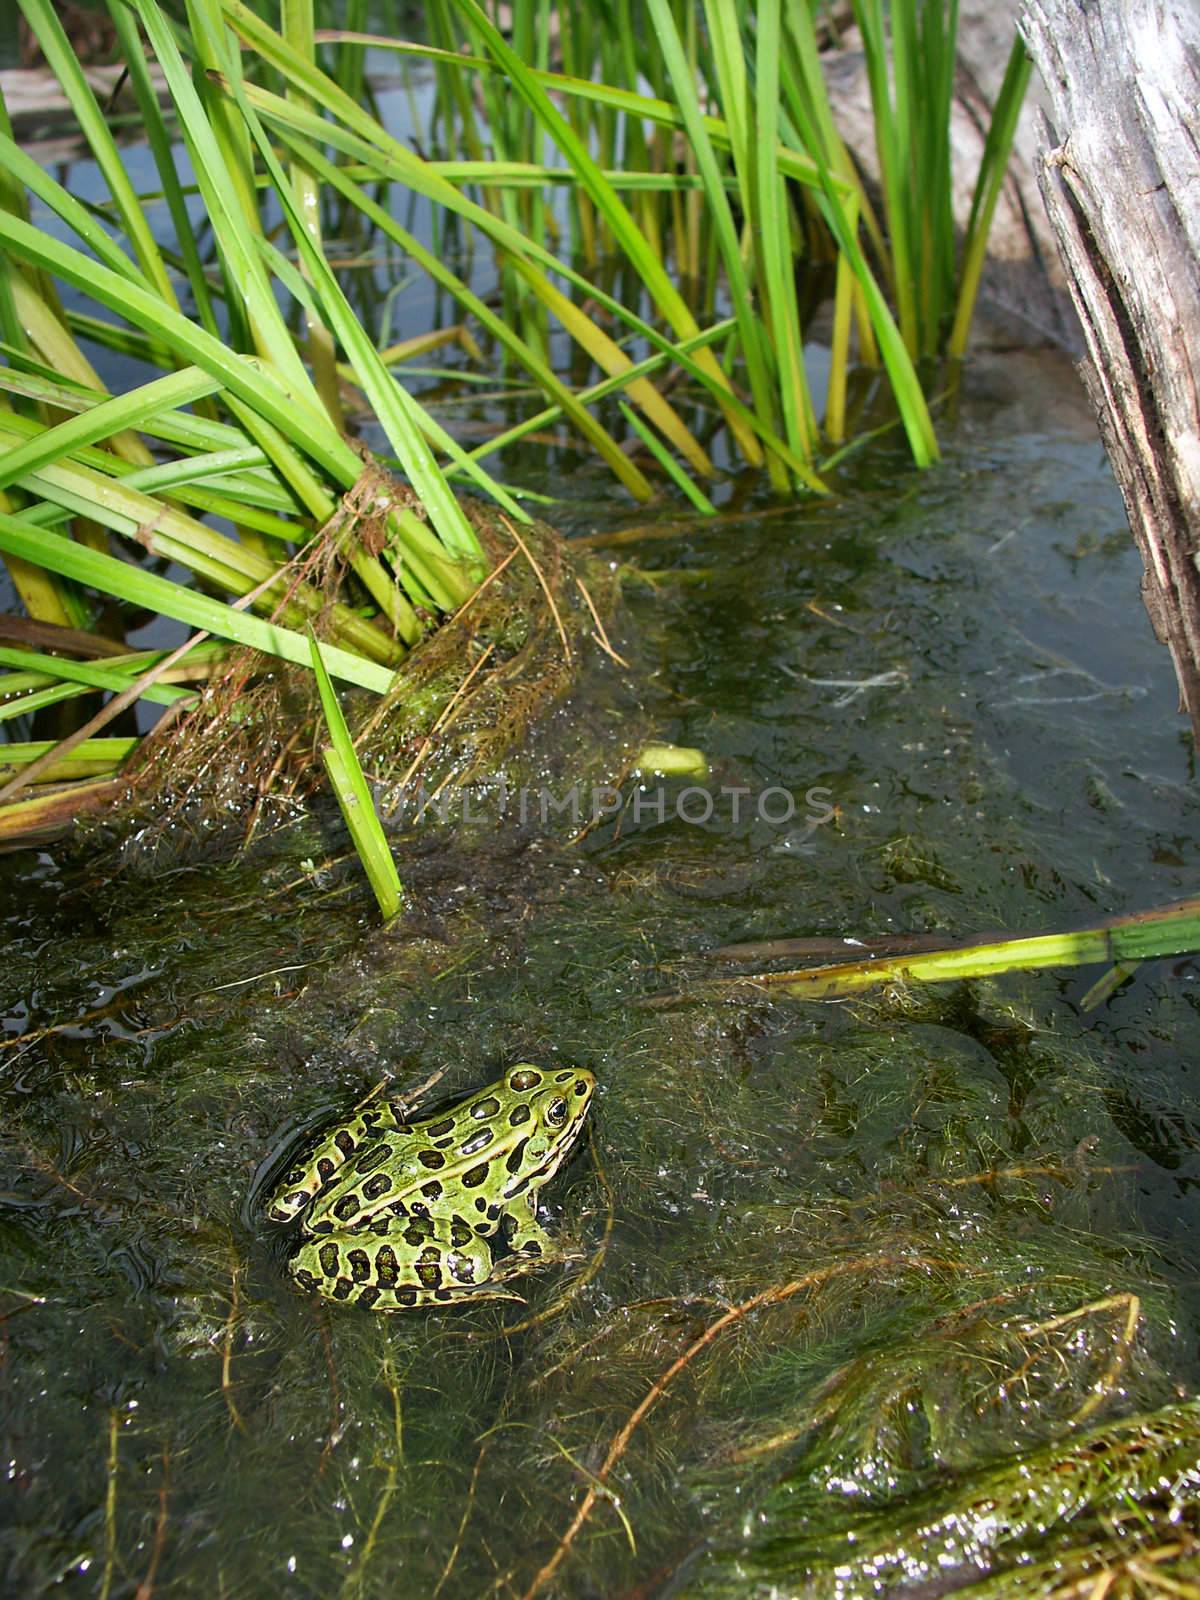 Northern Leopard Frog (Rana pipiens) by Wirepec